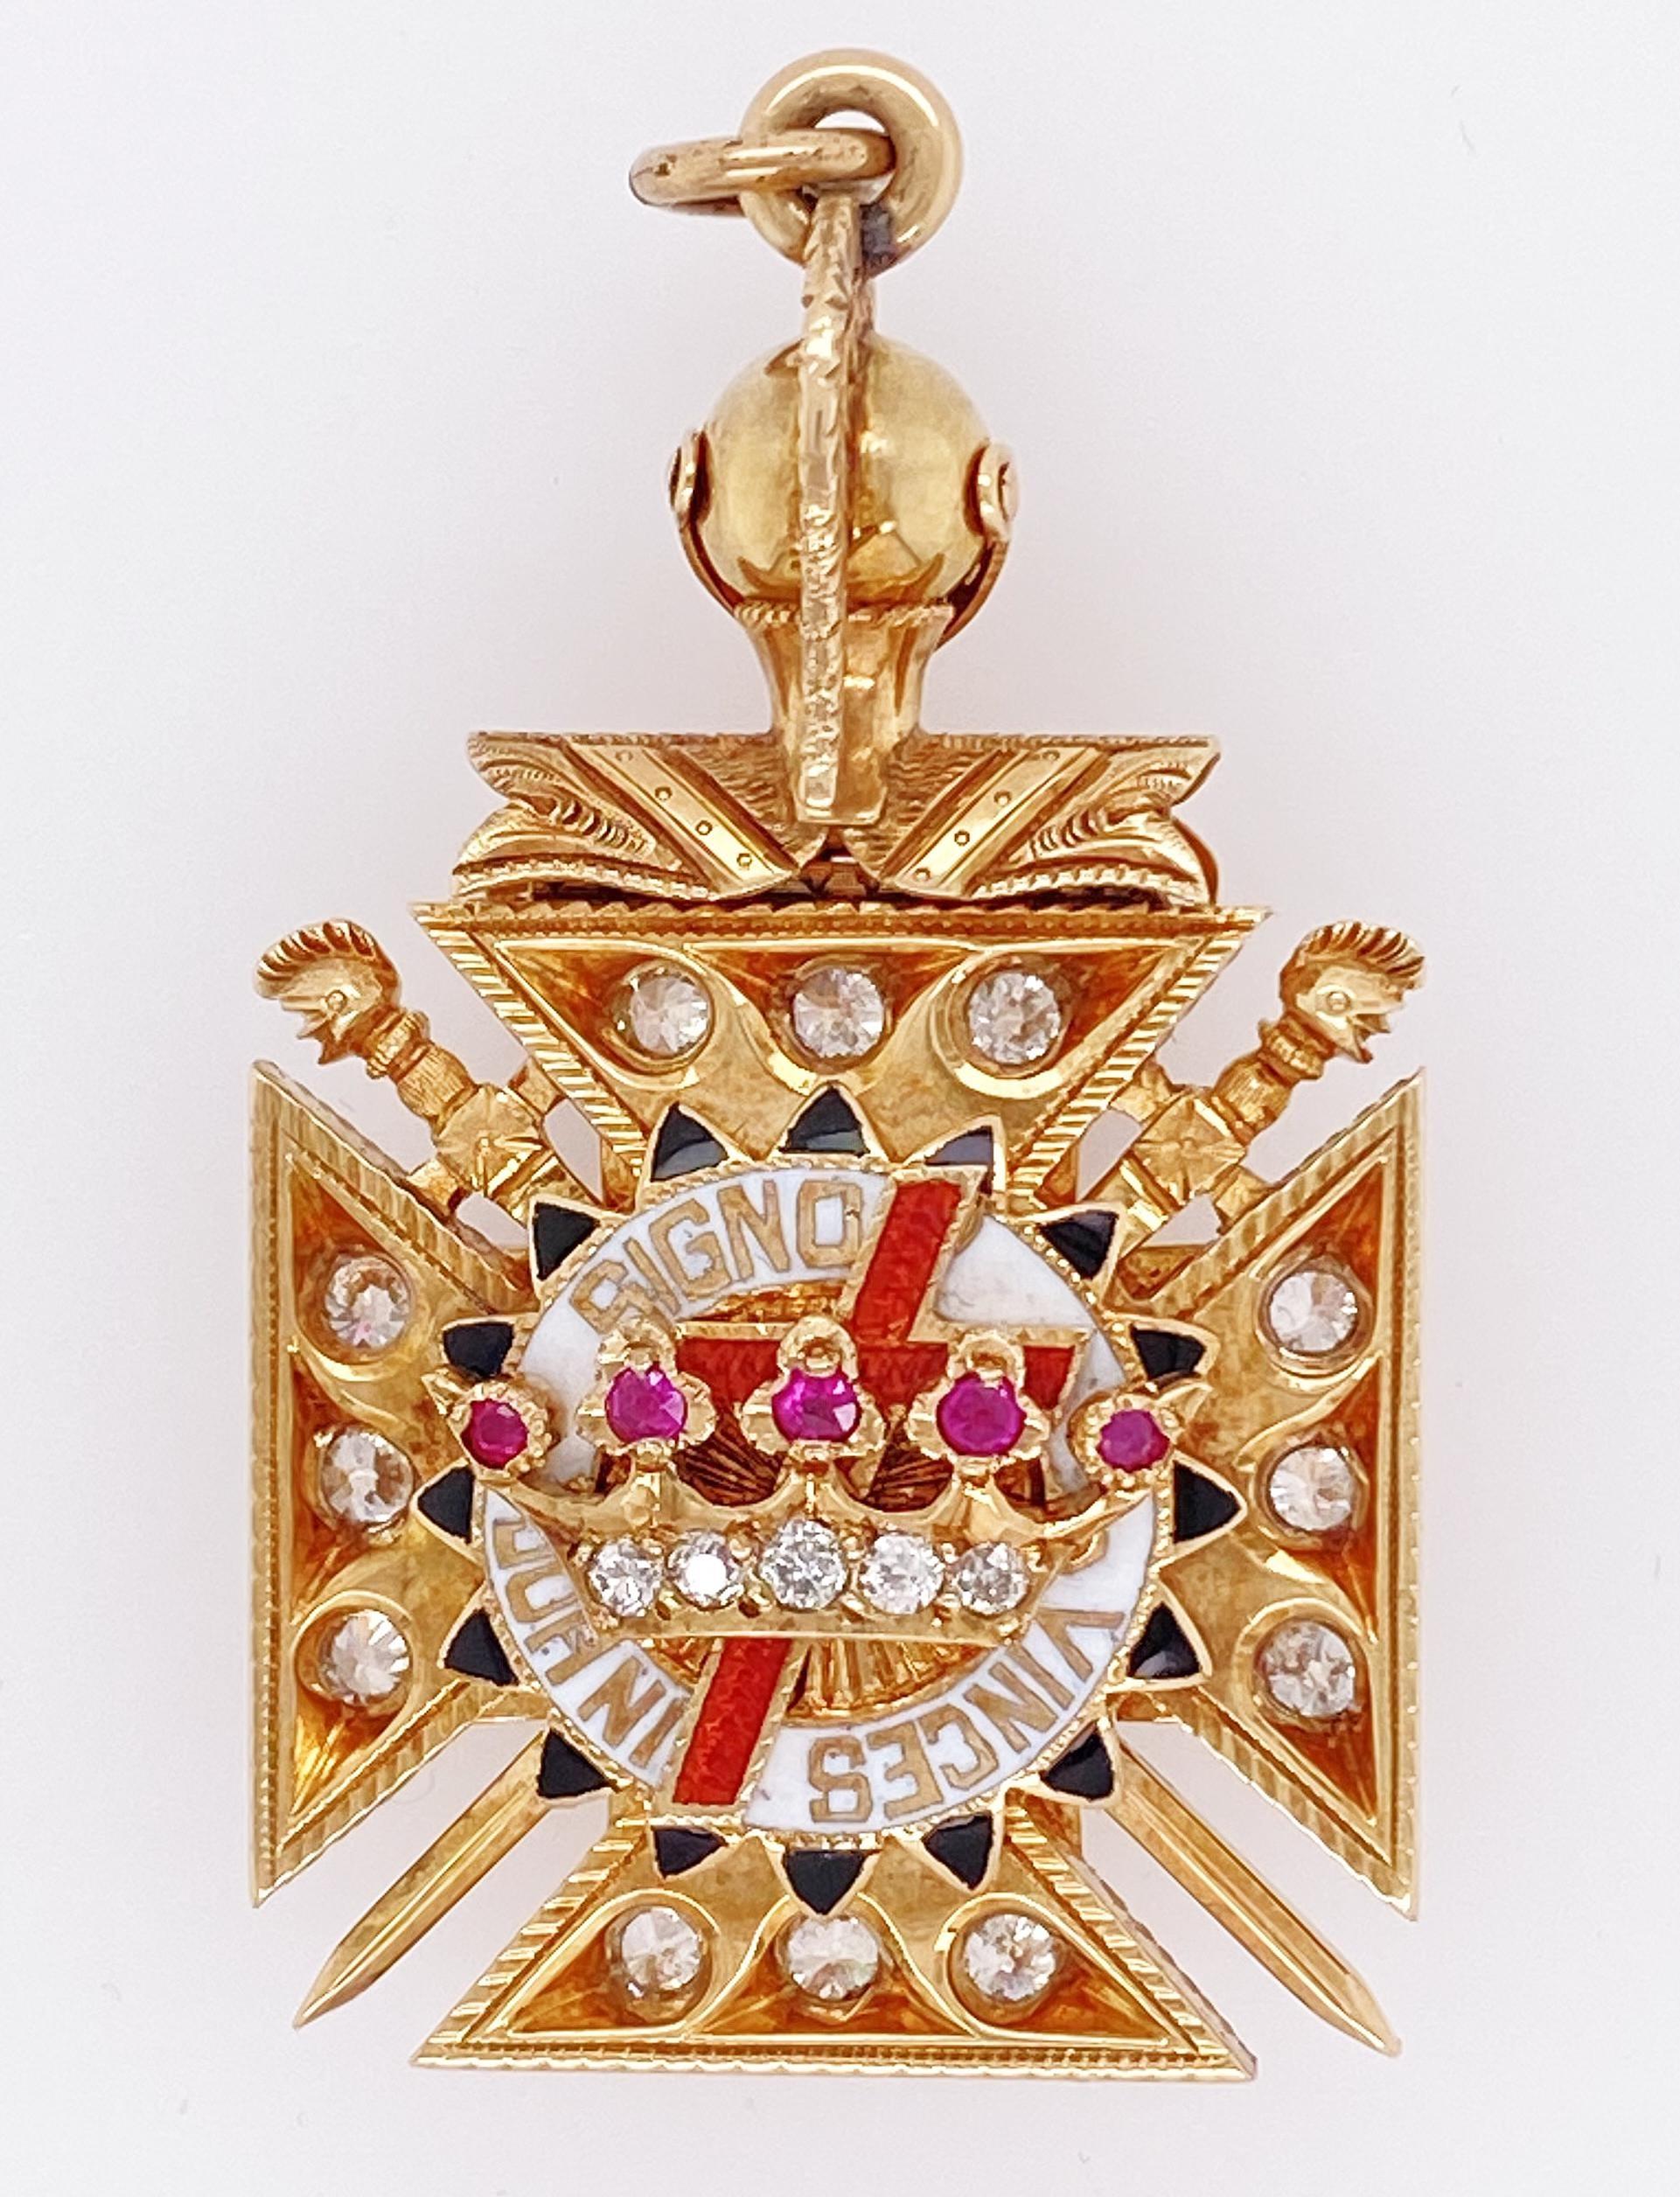 18K Y/gold enamel ruby diamond pendant. One side with two headed eagle the other side a diamond crown, movable warrior's visor. Old European cut diamonds weighing approx. 1.35 cts, IJ VSstamps Modele FC 750 Depose MADE IN ITALY, measures 1 3/4 x 1